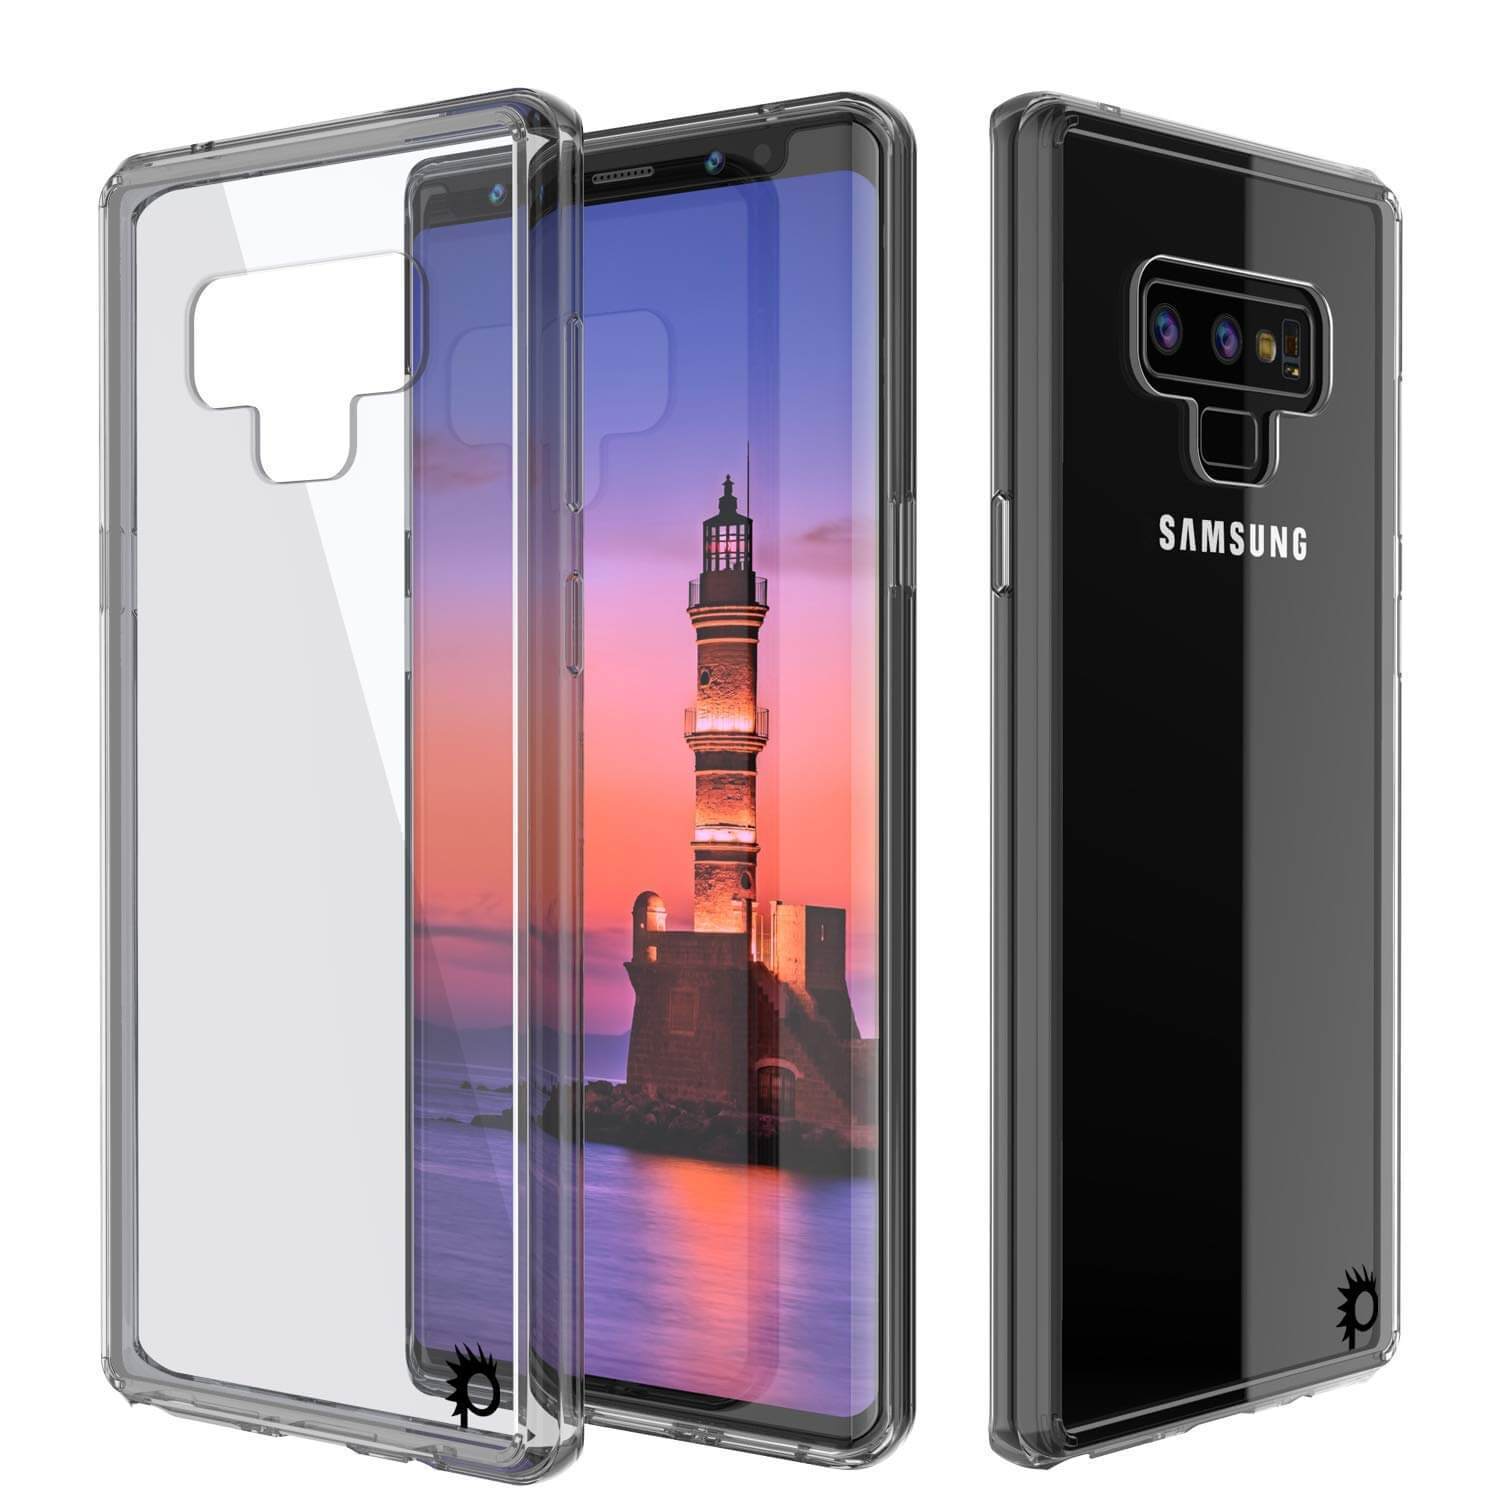 Galaxy Note 9 Punkcase Lucid-2.0 Series Slim Fit Armor Crystal Black Case Cover